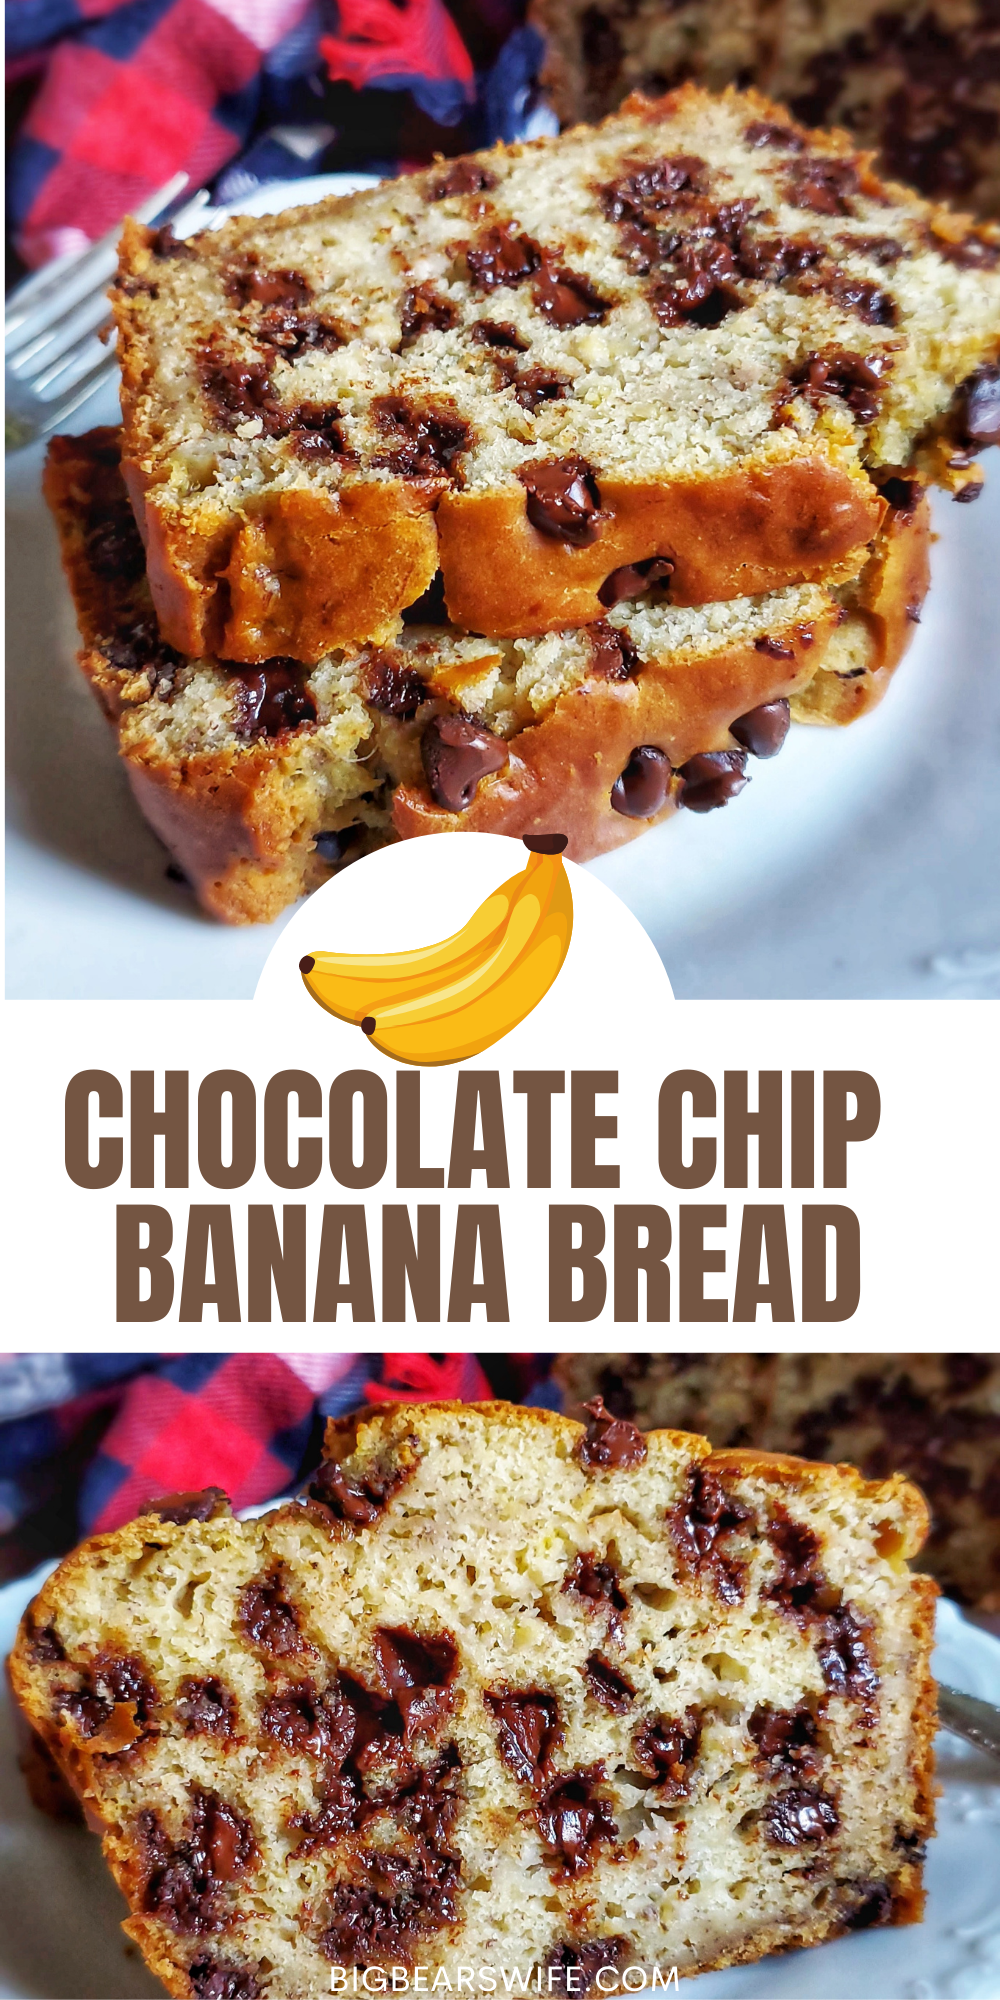 Love Banana Bread? This Chocolate Chip Banana Bread is a delicious homemade banana bread recipe that is packed with 2 cups of chocolate chips! Amazing for breakfast, dessert or a snack!  via @bigbearswife